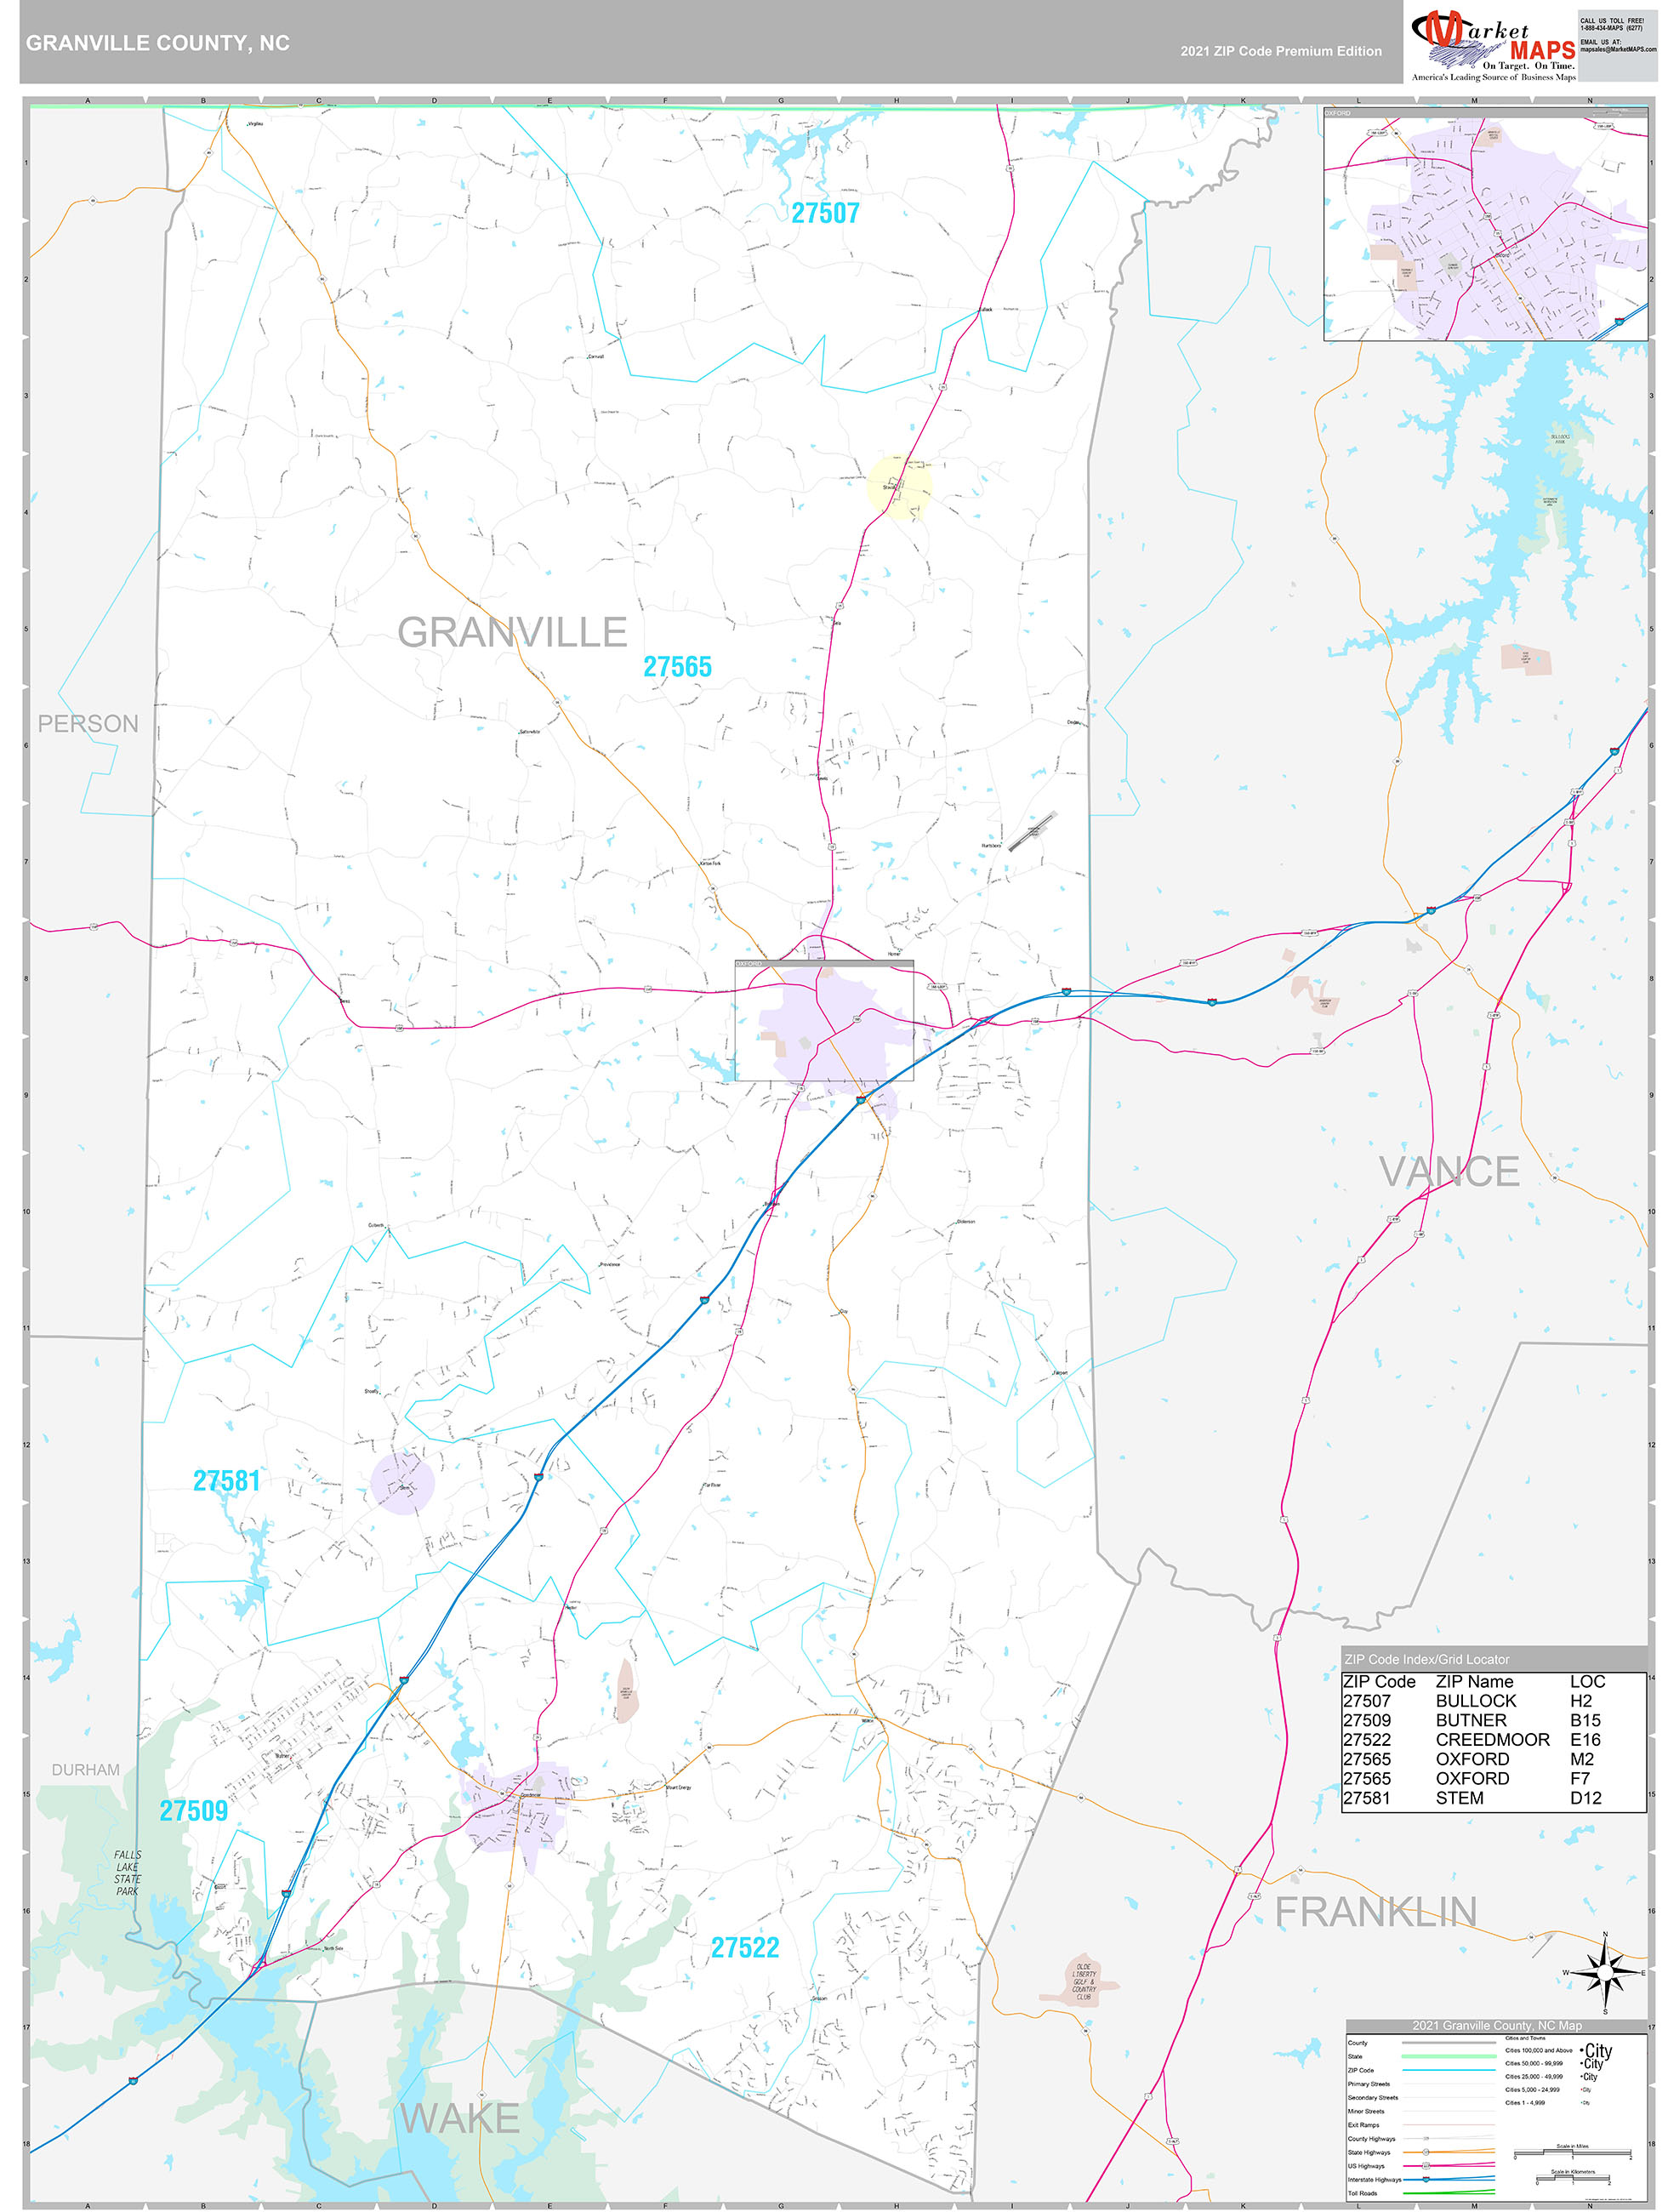 Granville County, NC Wall Map Premium Style by MarketMAPS